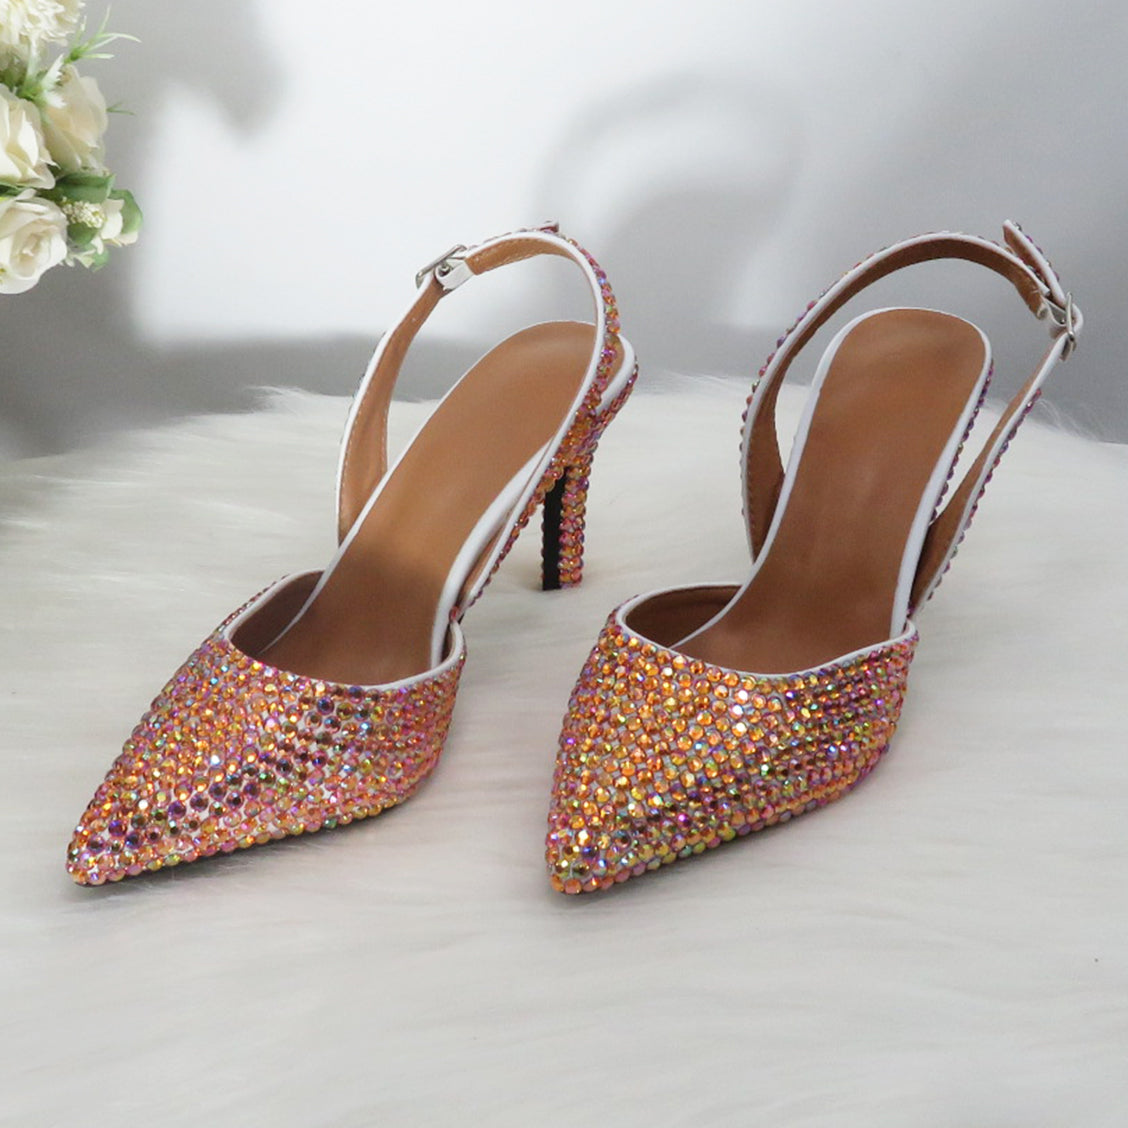 Glittered Pointed Toe Shoes for Women Glittered Pointed Toe Shoes for Women Glittered Pointed Toe Shoes for Women Glittered Pointed Toe Shoes for Women